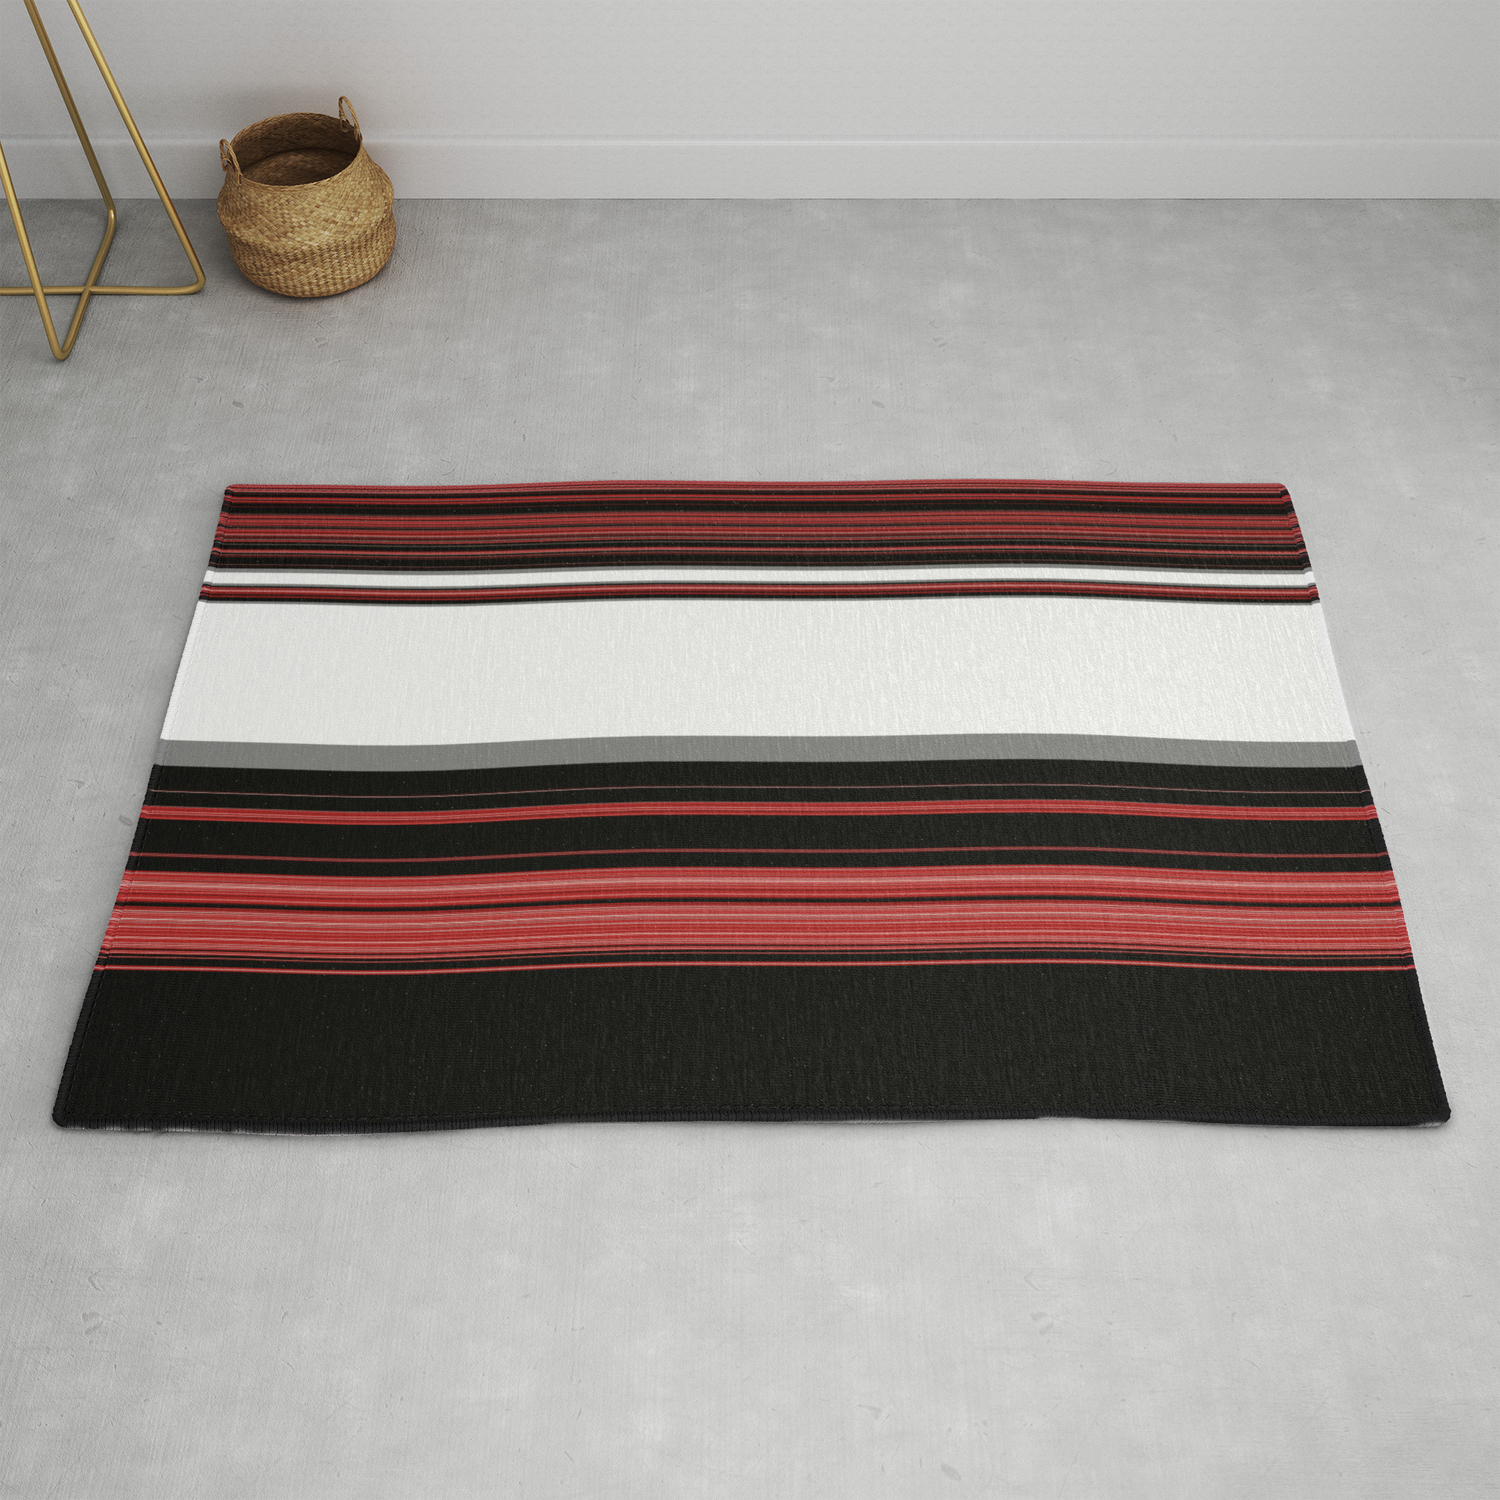 Black And White With Gray Stripes Rug, Red Black White Rug